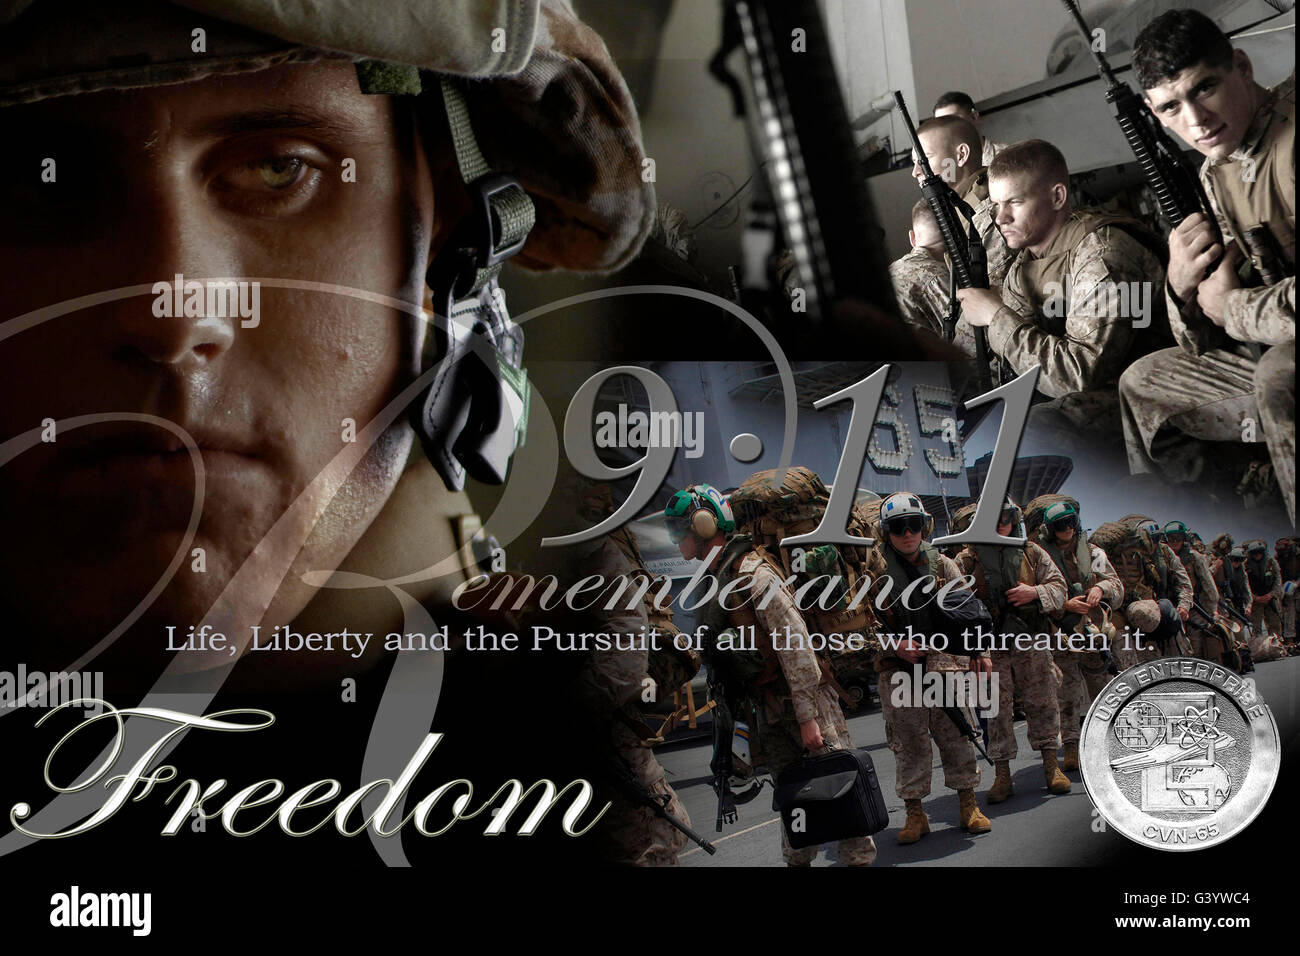 Illustration of crew members involved in Operation Enduring Freedom. Stock Photo